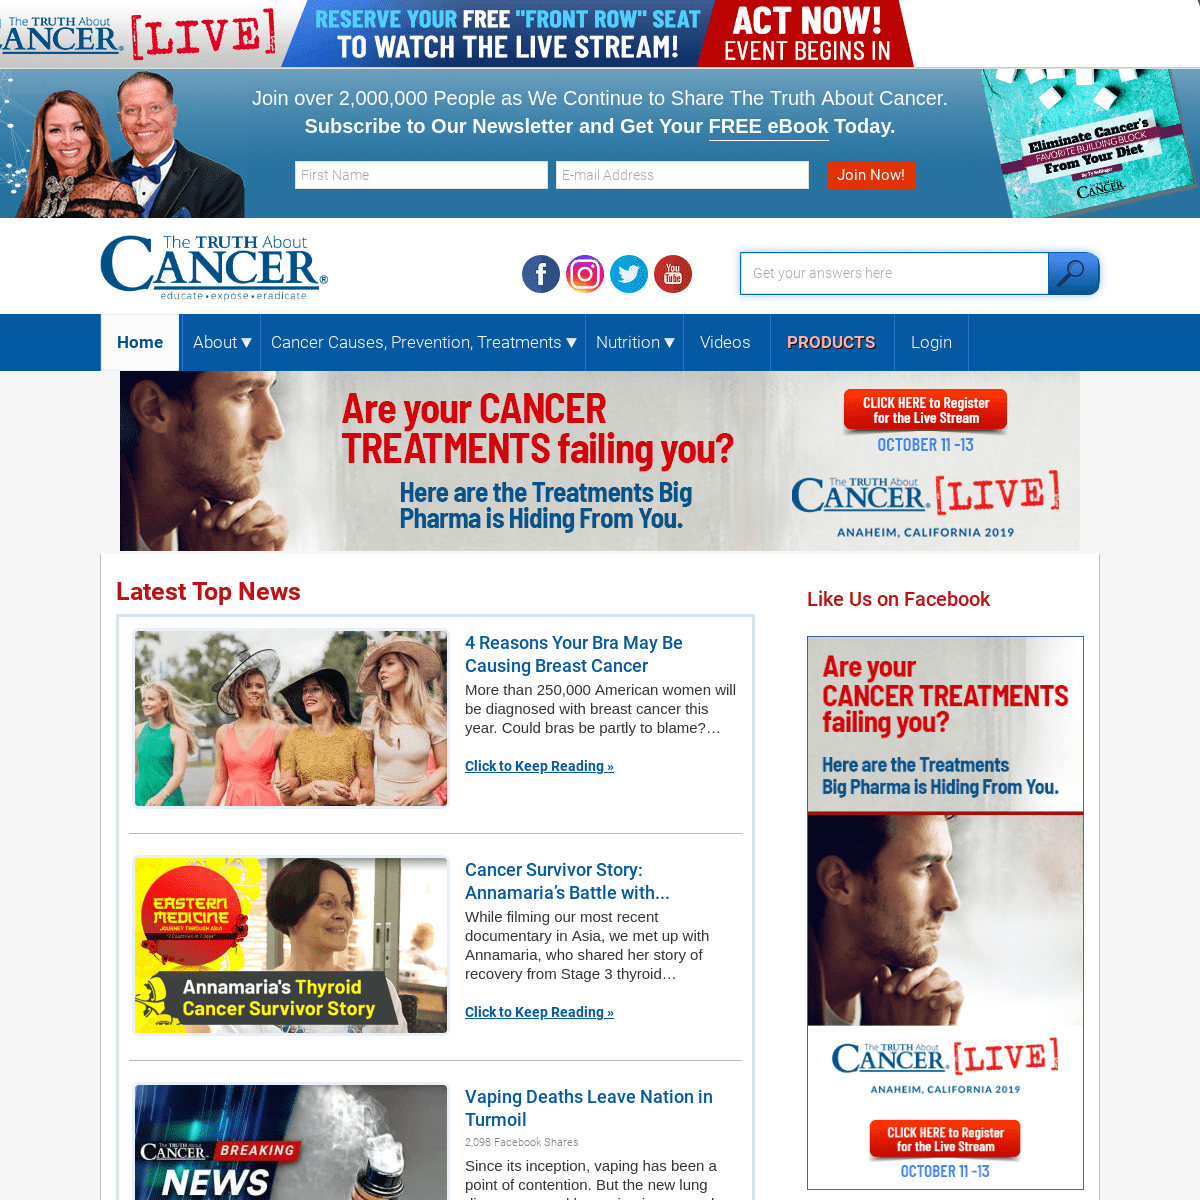 The Truth About Cancer | The Latest Cancer Fighting News